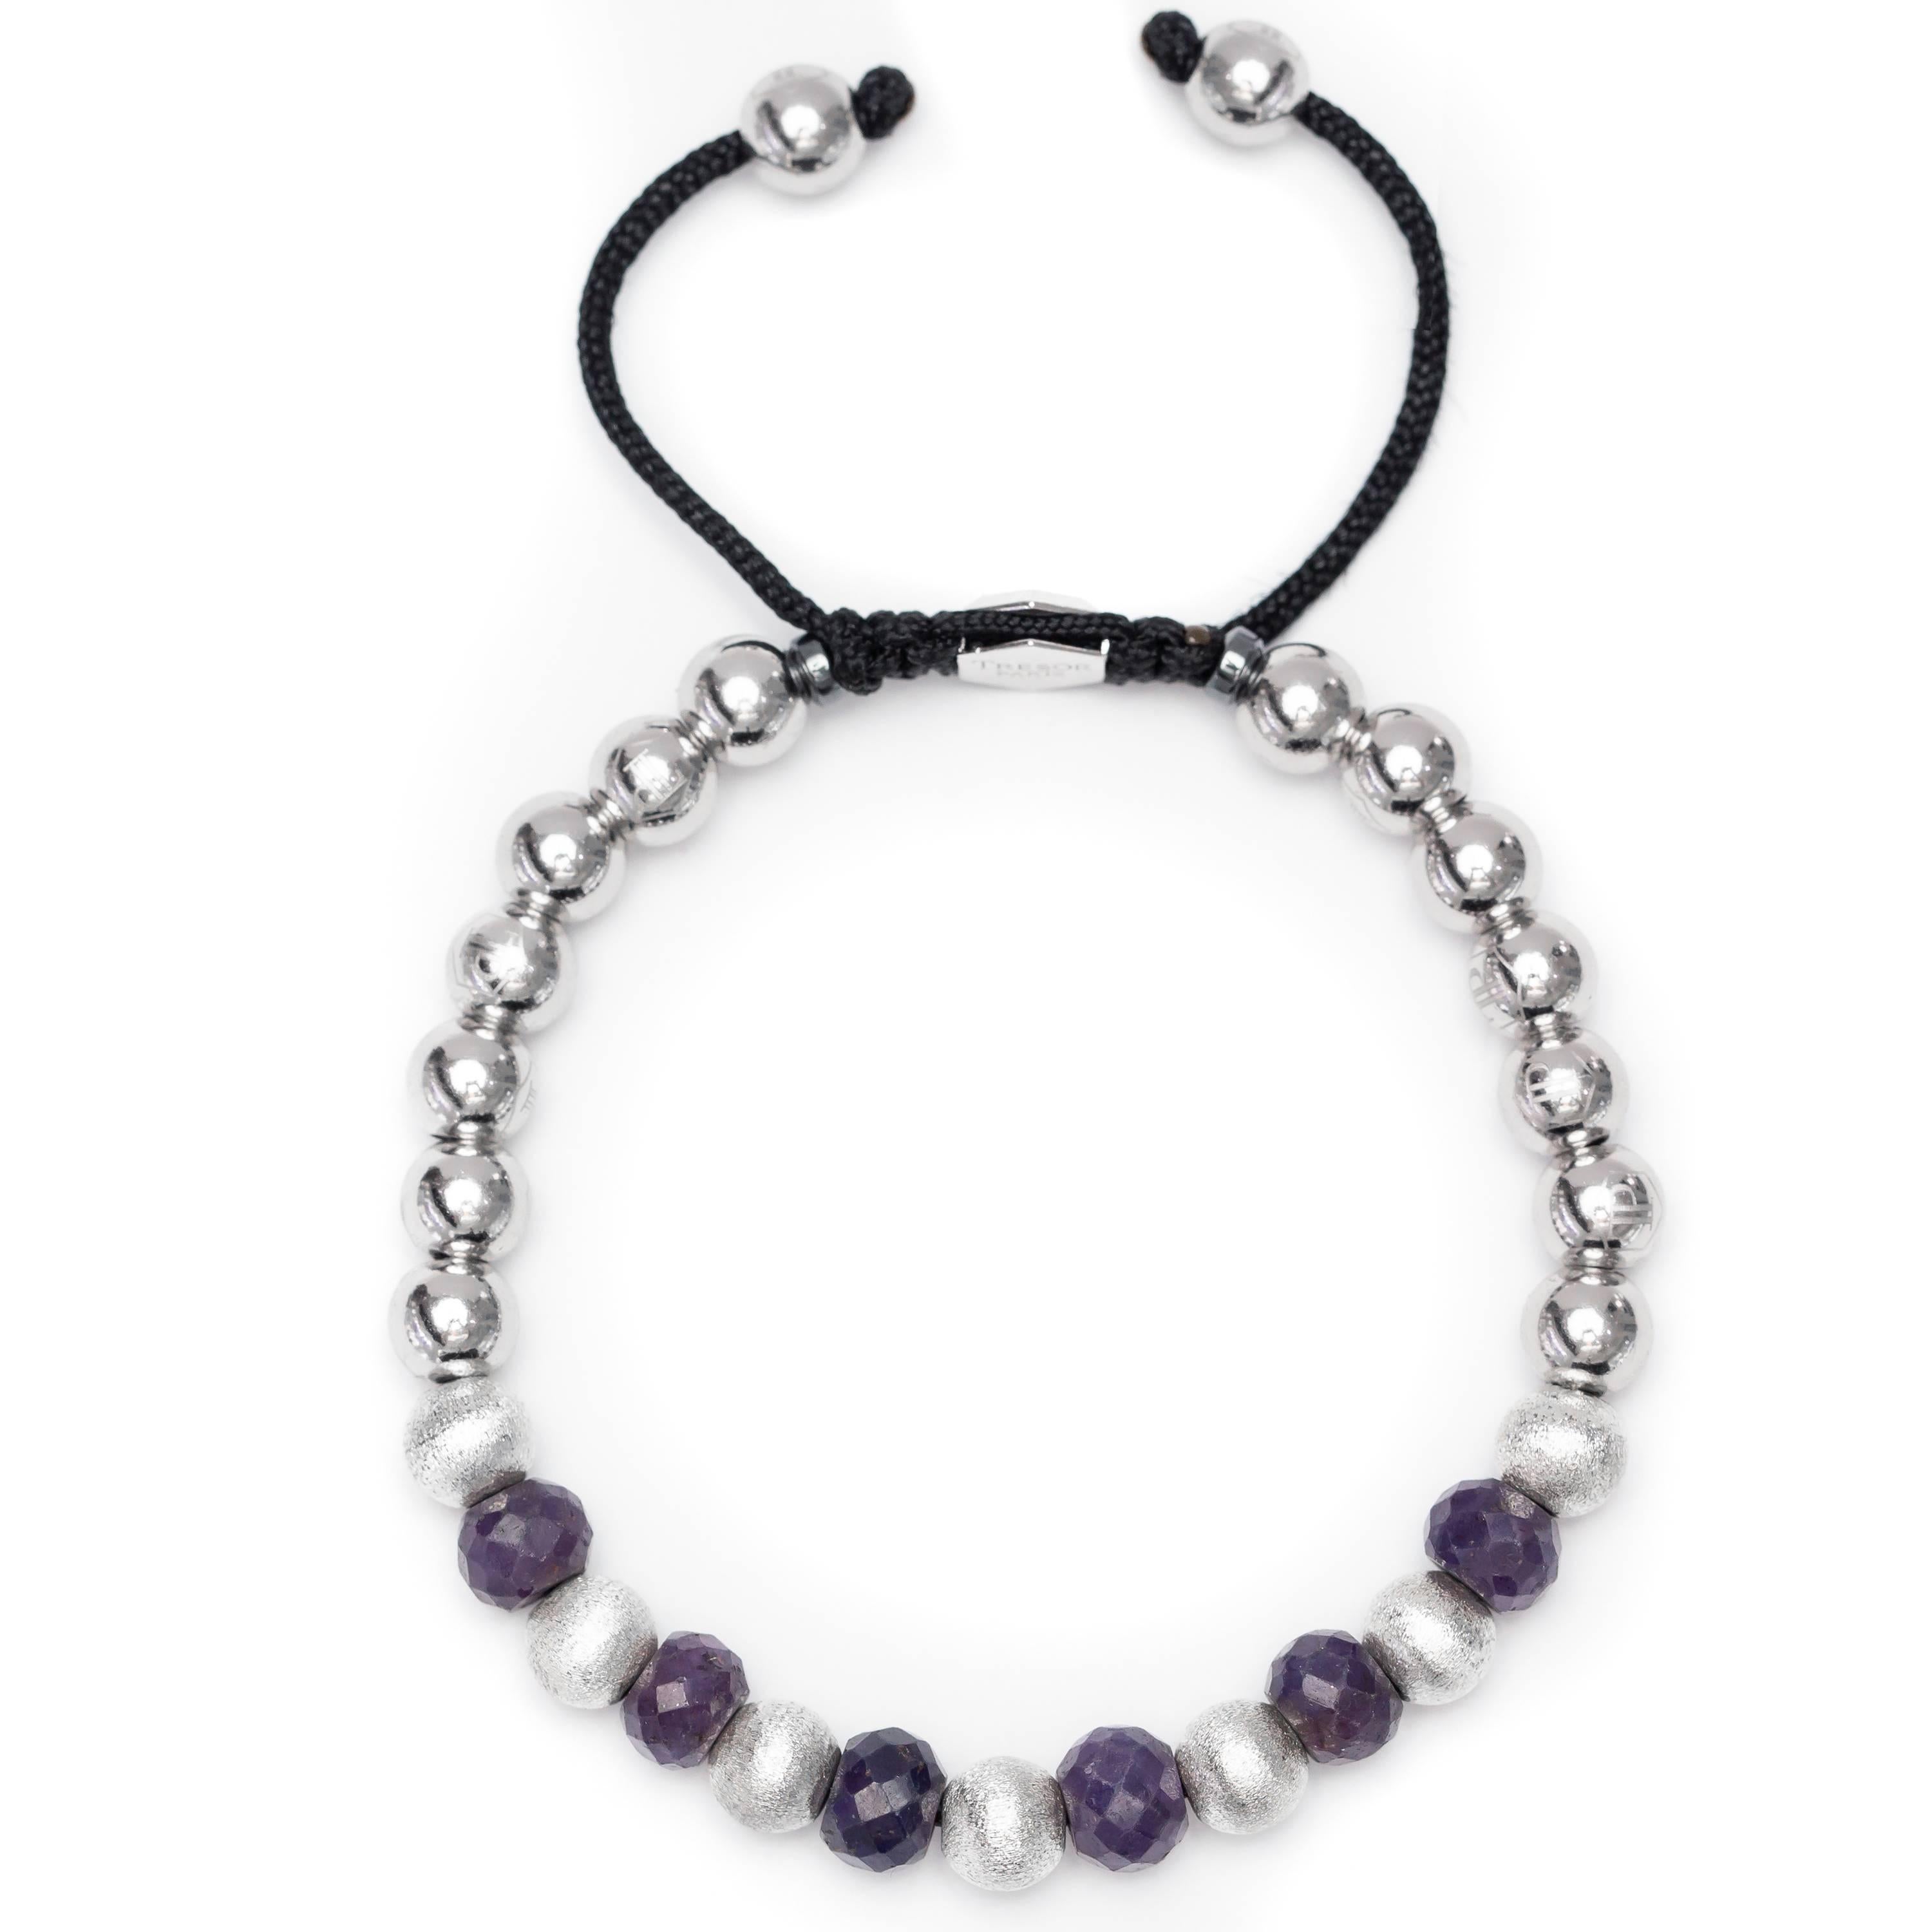 A bespoke This particular one has 11.46 Carat Blue Sapphire Stainless Steel and Silver Macrame beaded bracelet from The Original Tresor Paris Caresse Bleu Collection. This Bracelet features 7 satin beads and 14 Stainless Steel beads with a Silver